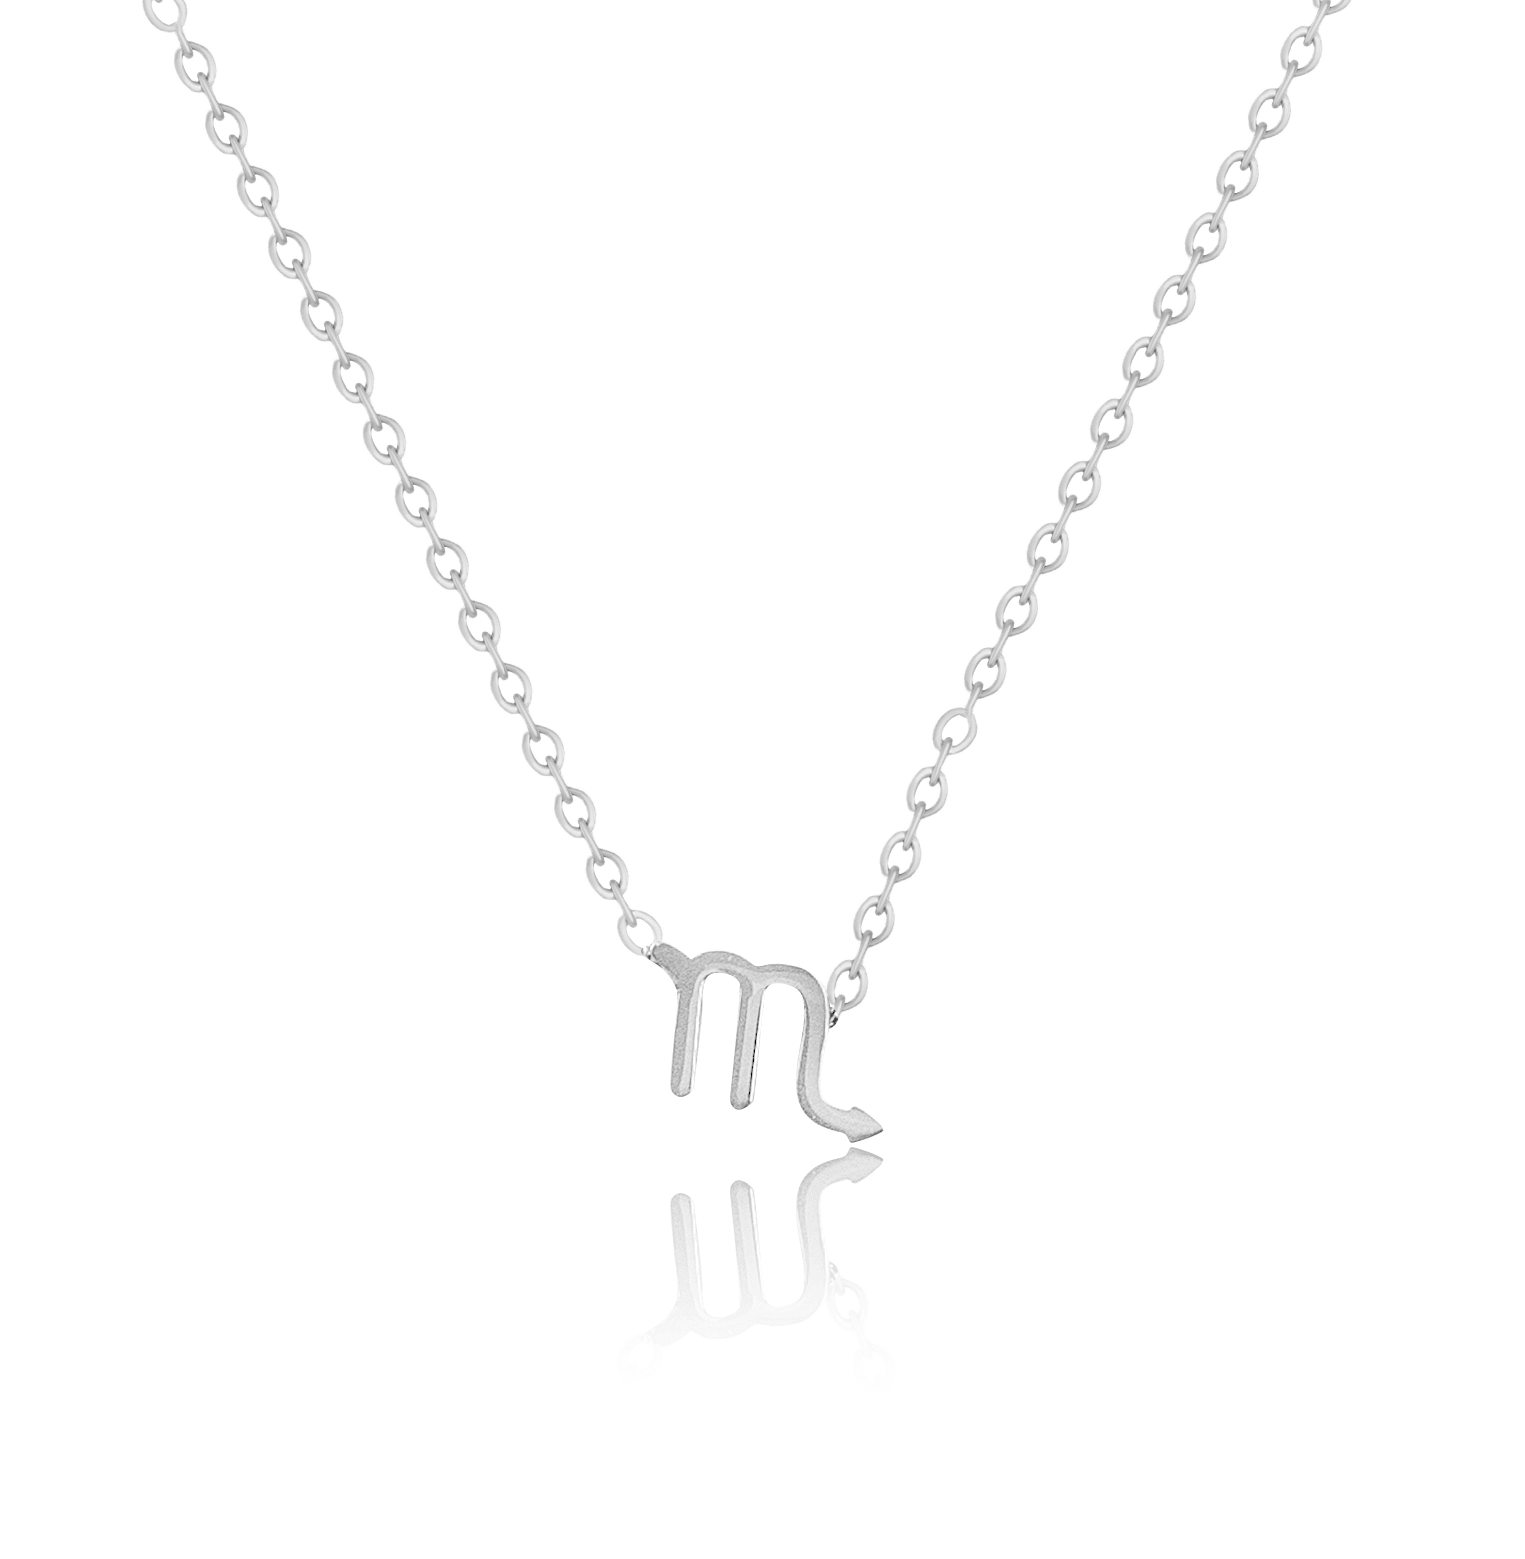 bianco rosso Necklaces Silver Scorpio - Necklace cyprus greece jewelry gift free shipping europe worldwide